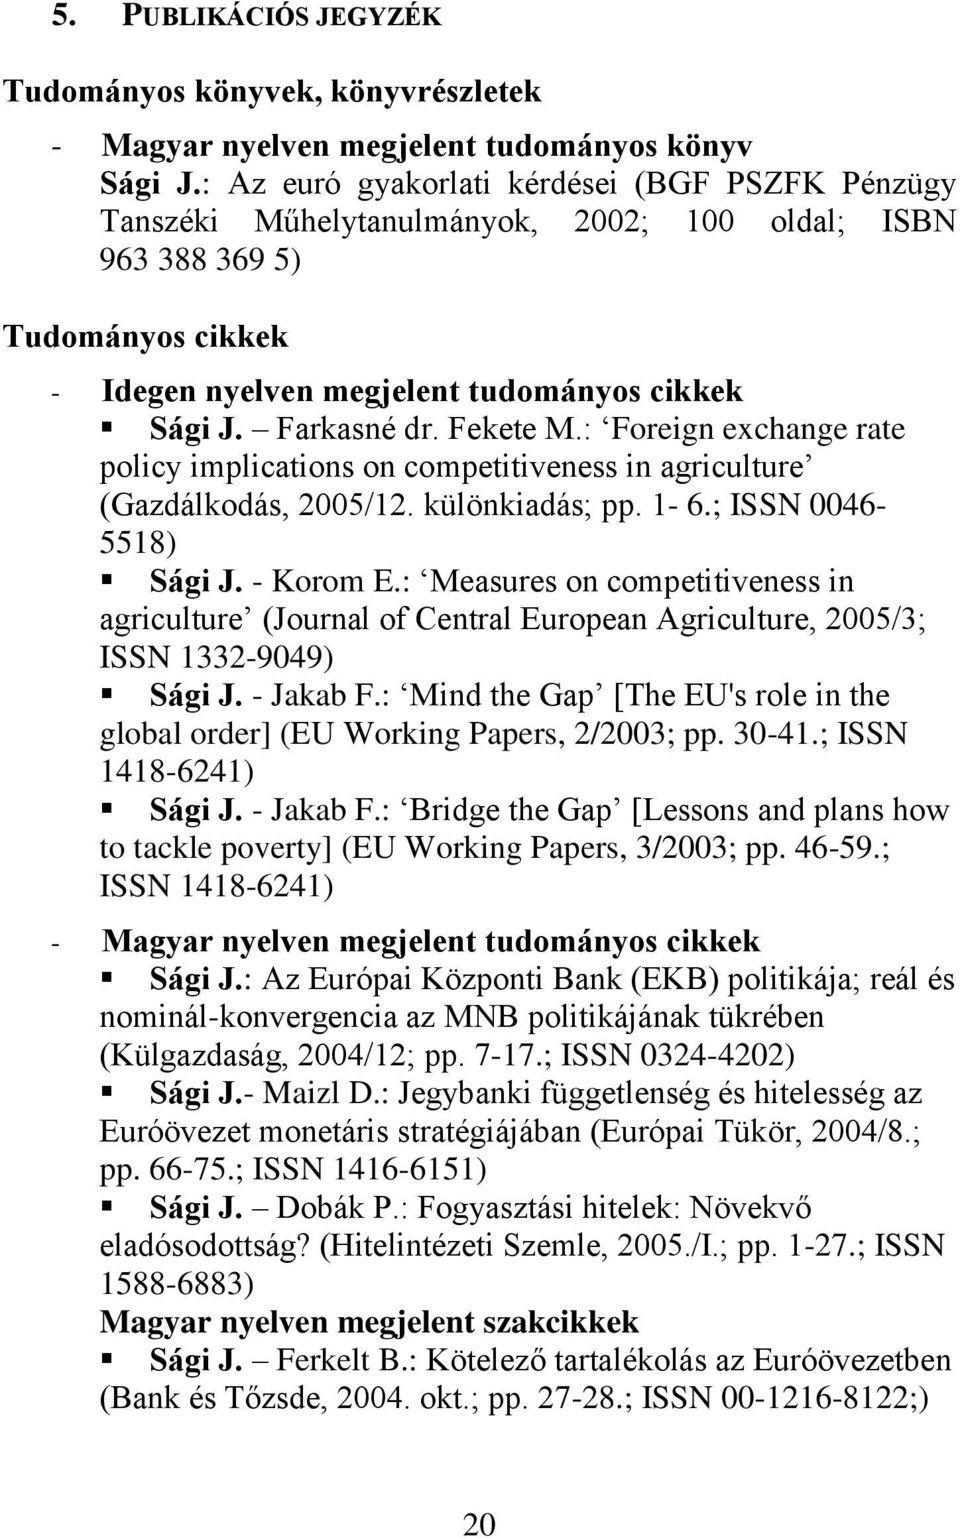 Fekete M.: Foreign exchange rate policy implications on competitiveness in agriculture (Gazdálkodás, 2005/12. különkiadás; pp. 1-6.; ISSN 0046-5518) Sági J. - Korom E.